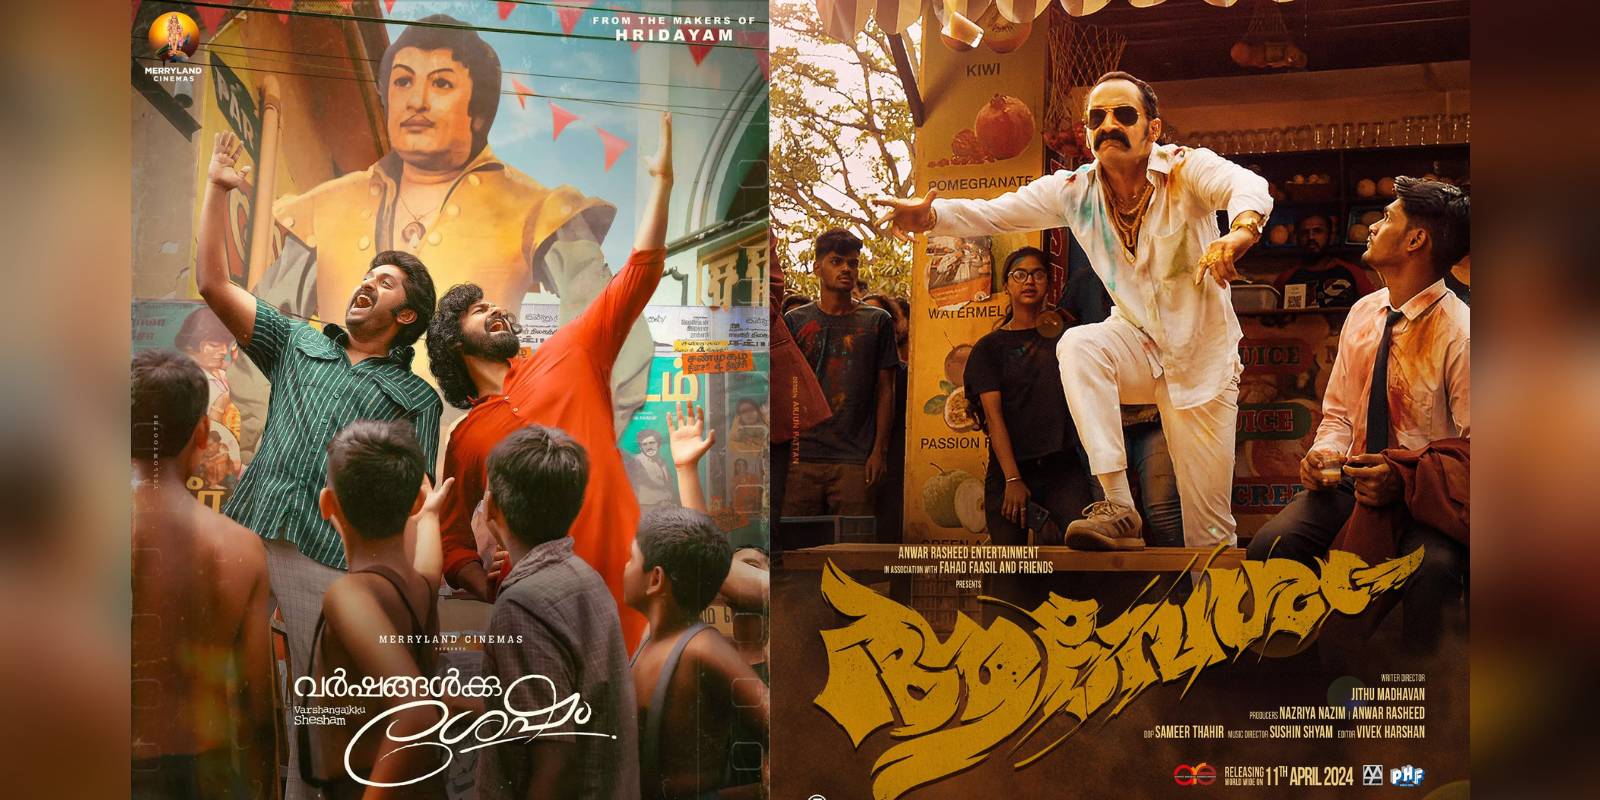 Malayalam movies continue to rule the box office in April, too